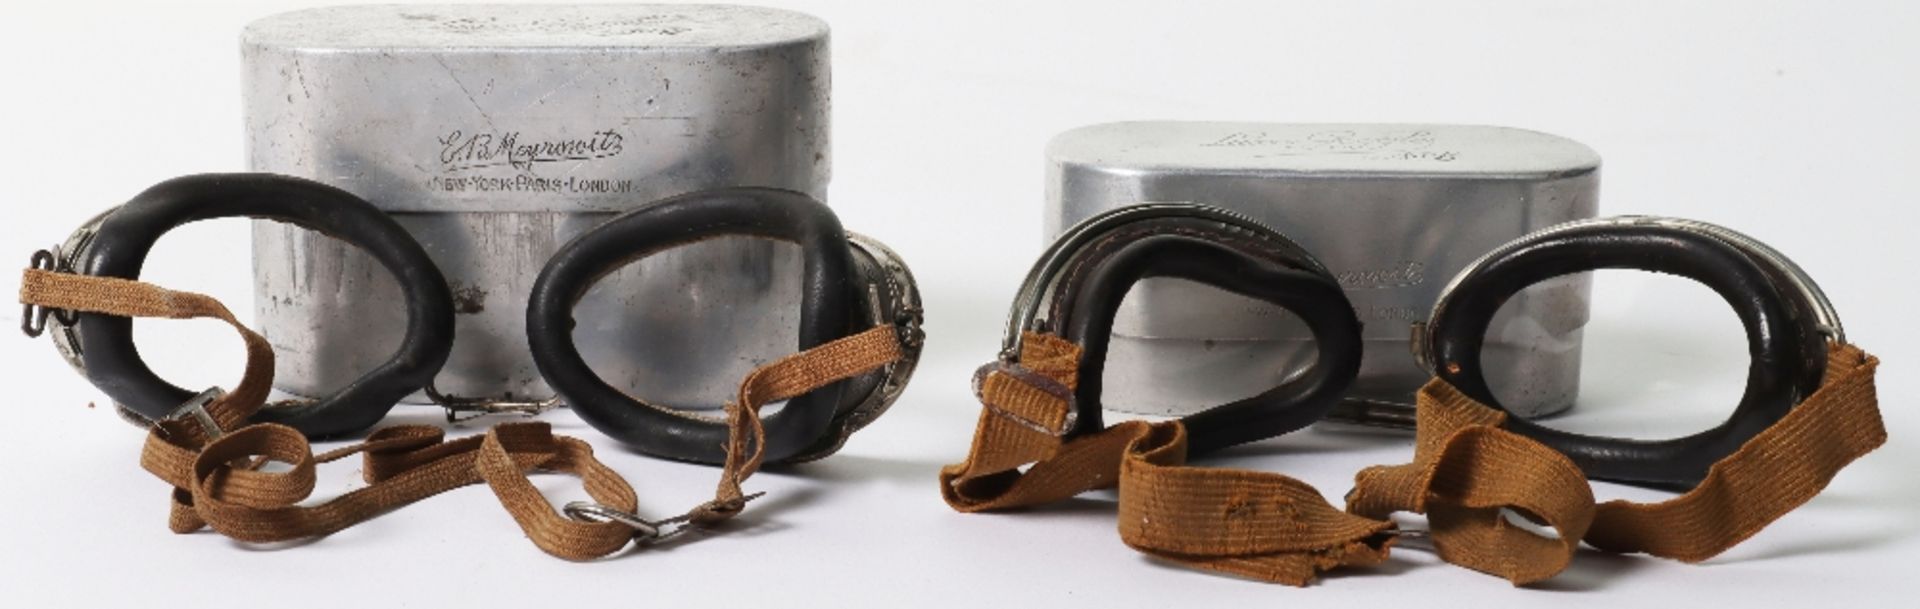 2x Pairs of Aviators Luxor Goggles by E B Meyrowitz - Image 2 of 6